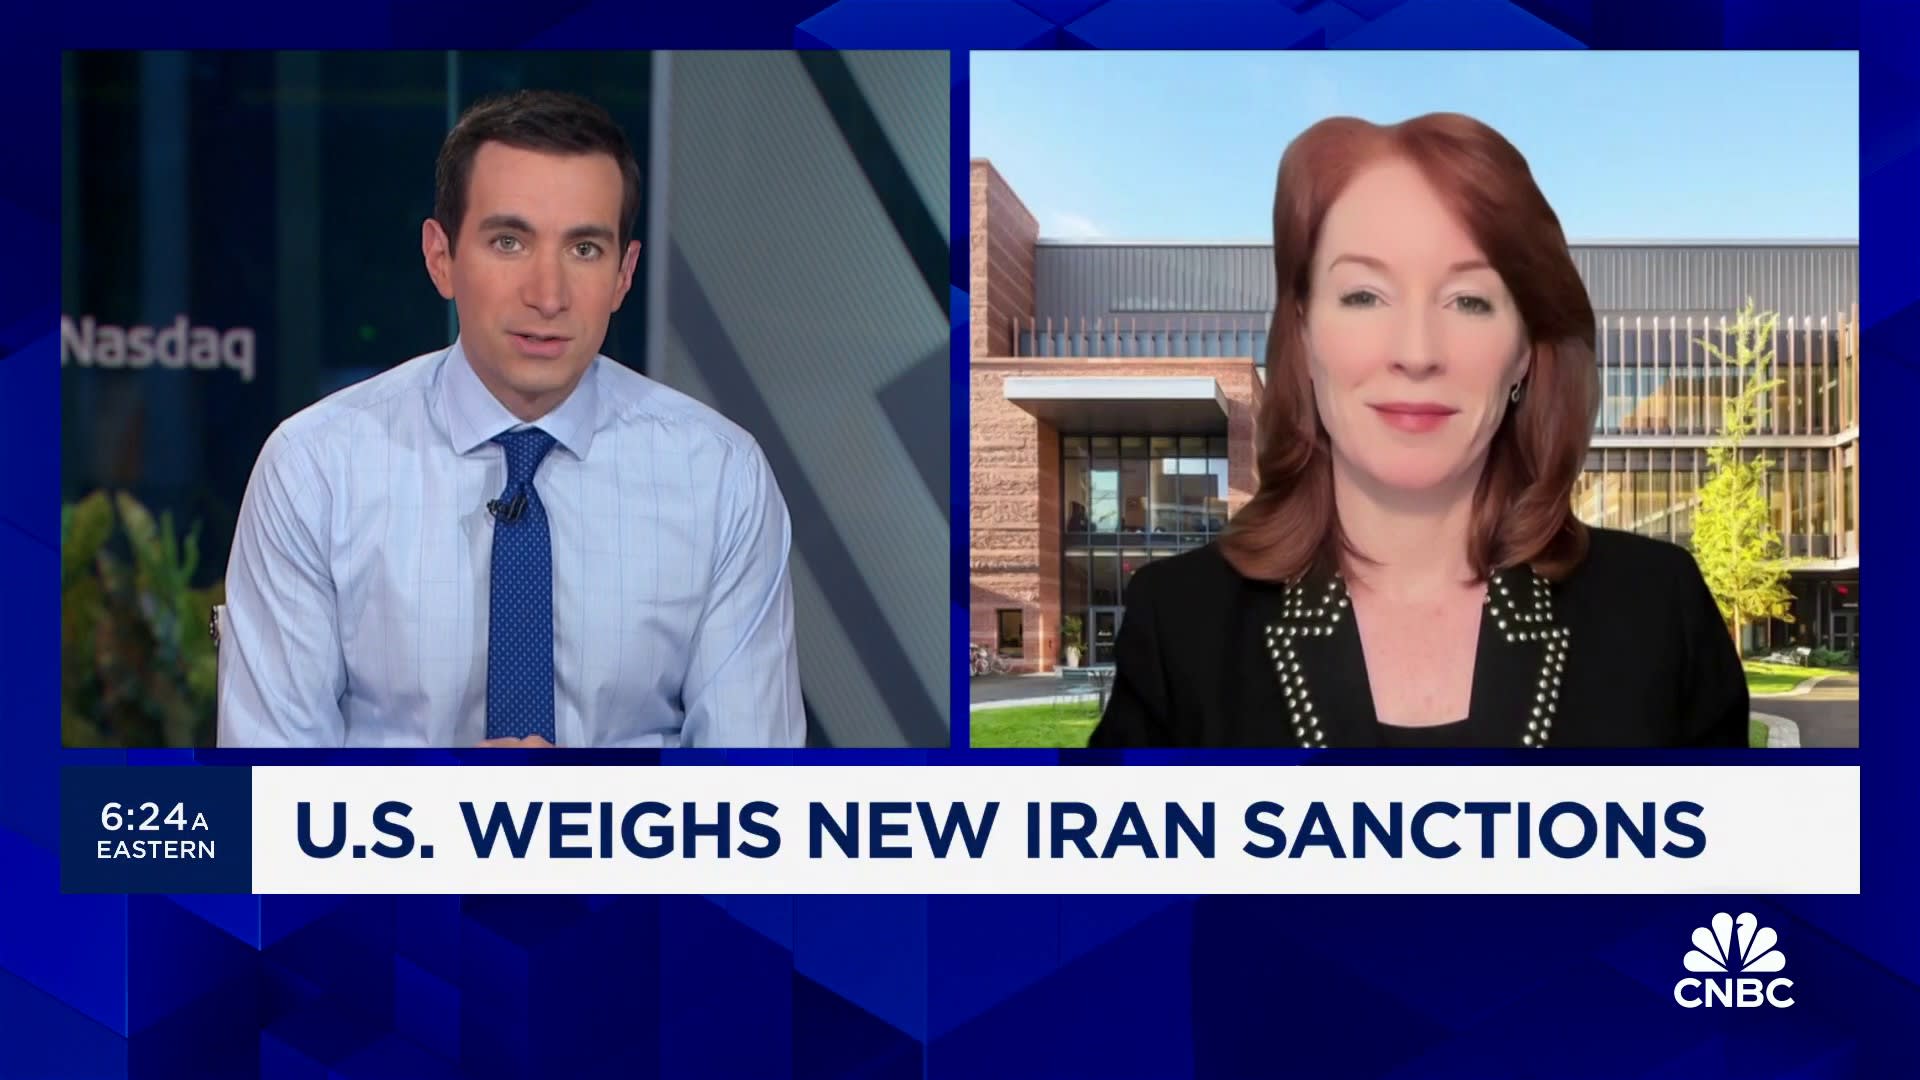 Iran is willing to take the risk that a larger war will develop, says Harvard’s Meghan O’Sullivan